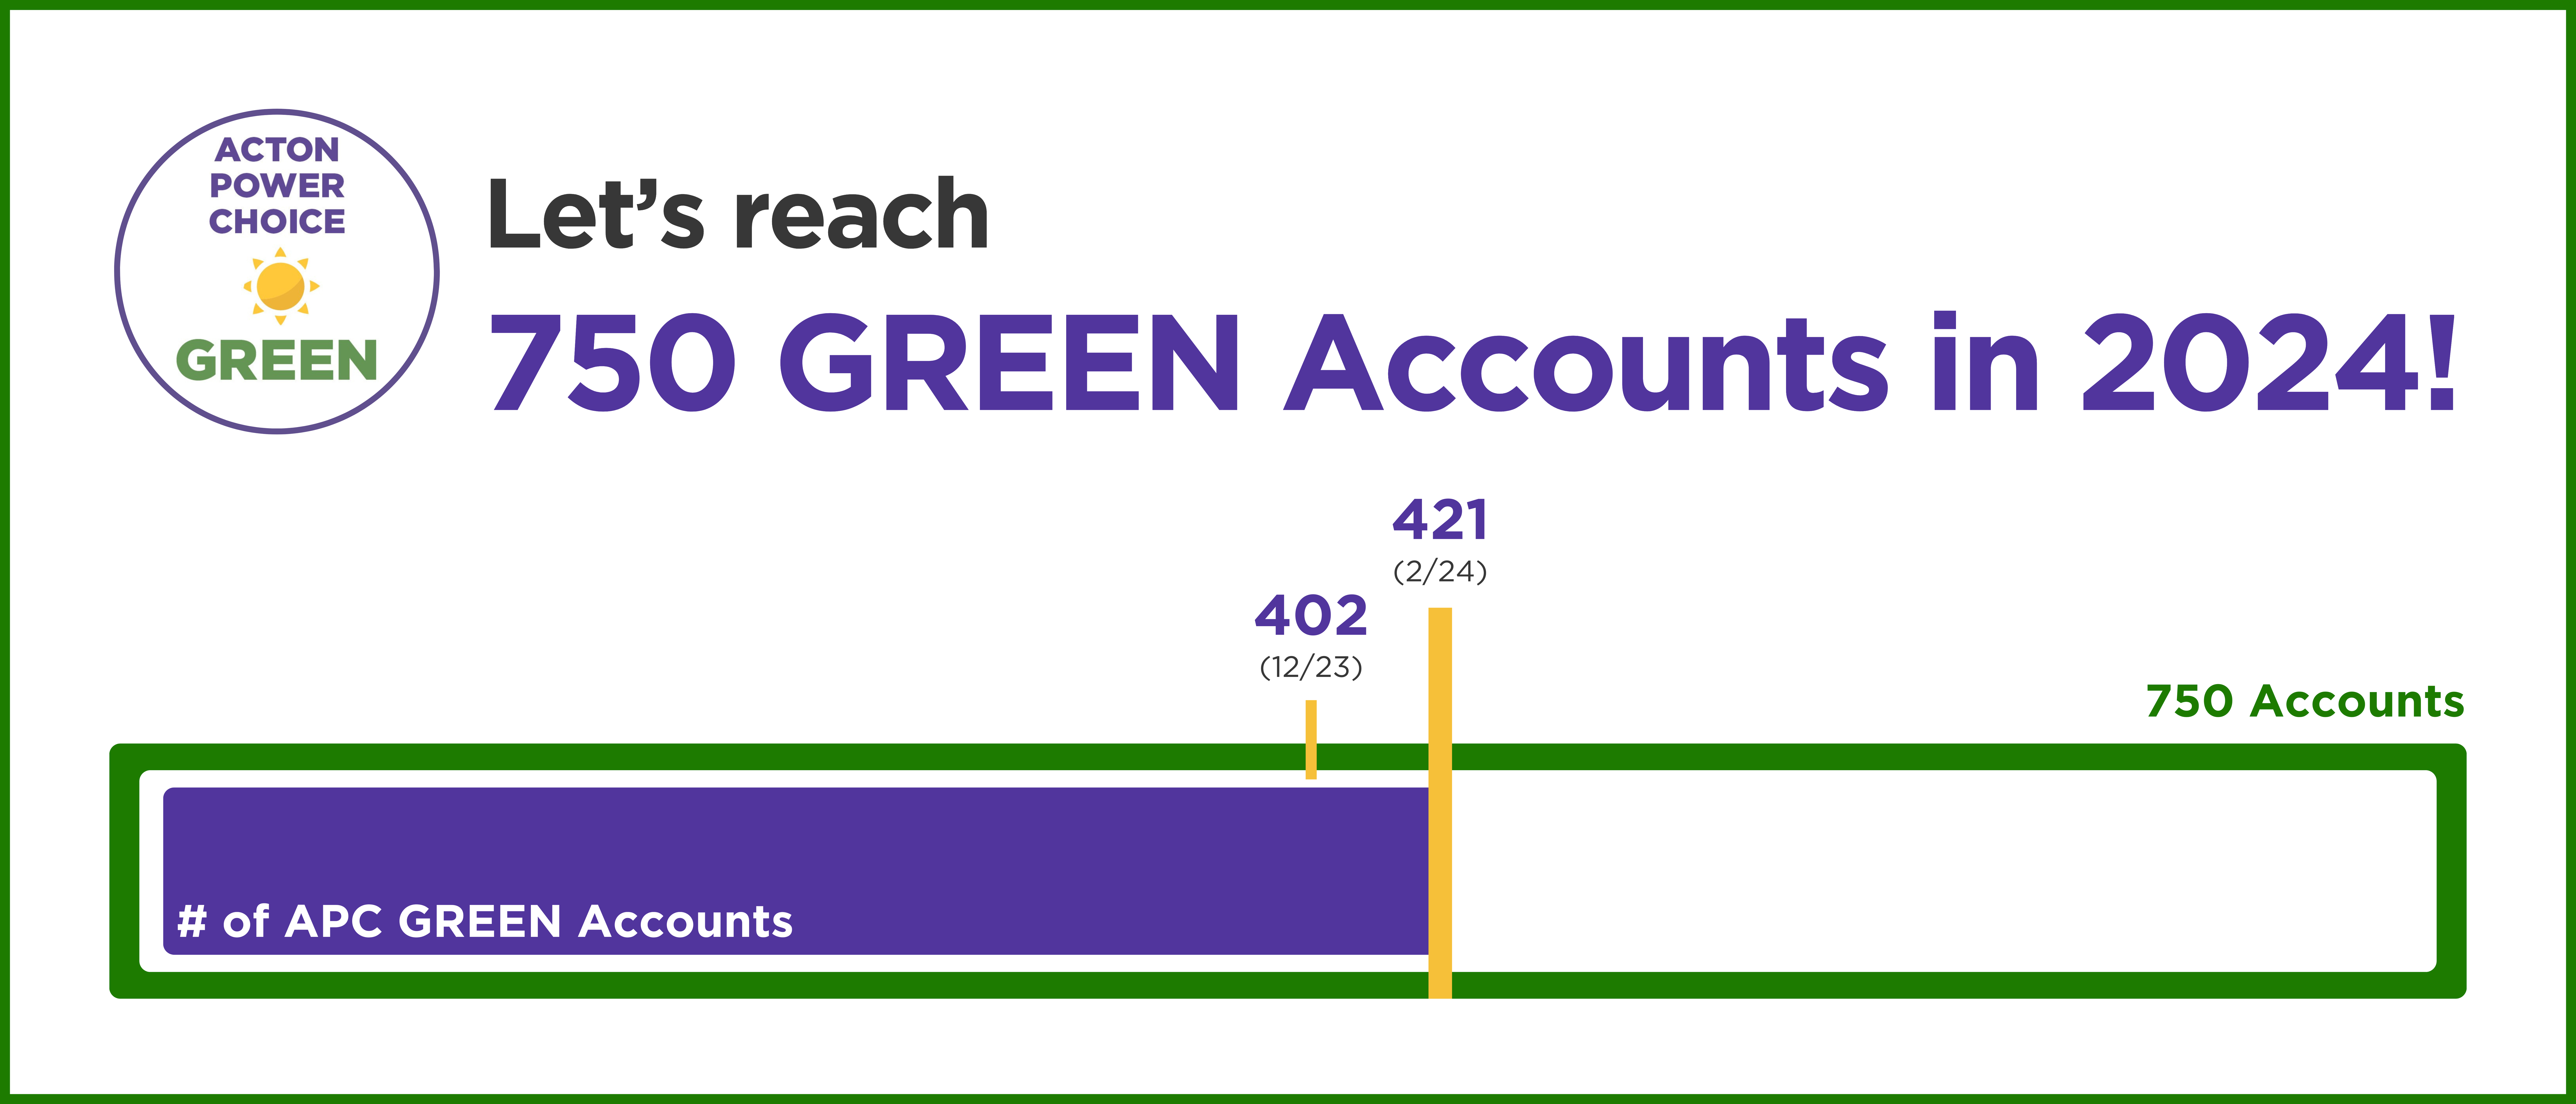 Status bar showing 421 accounts on Acton Power Choice Green as of February 2024